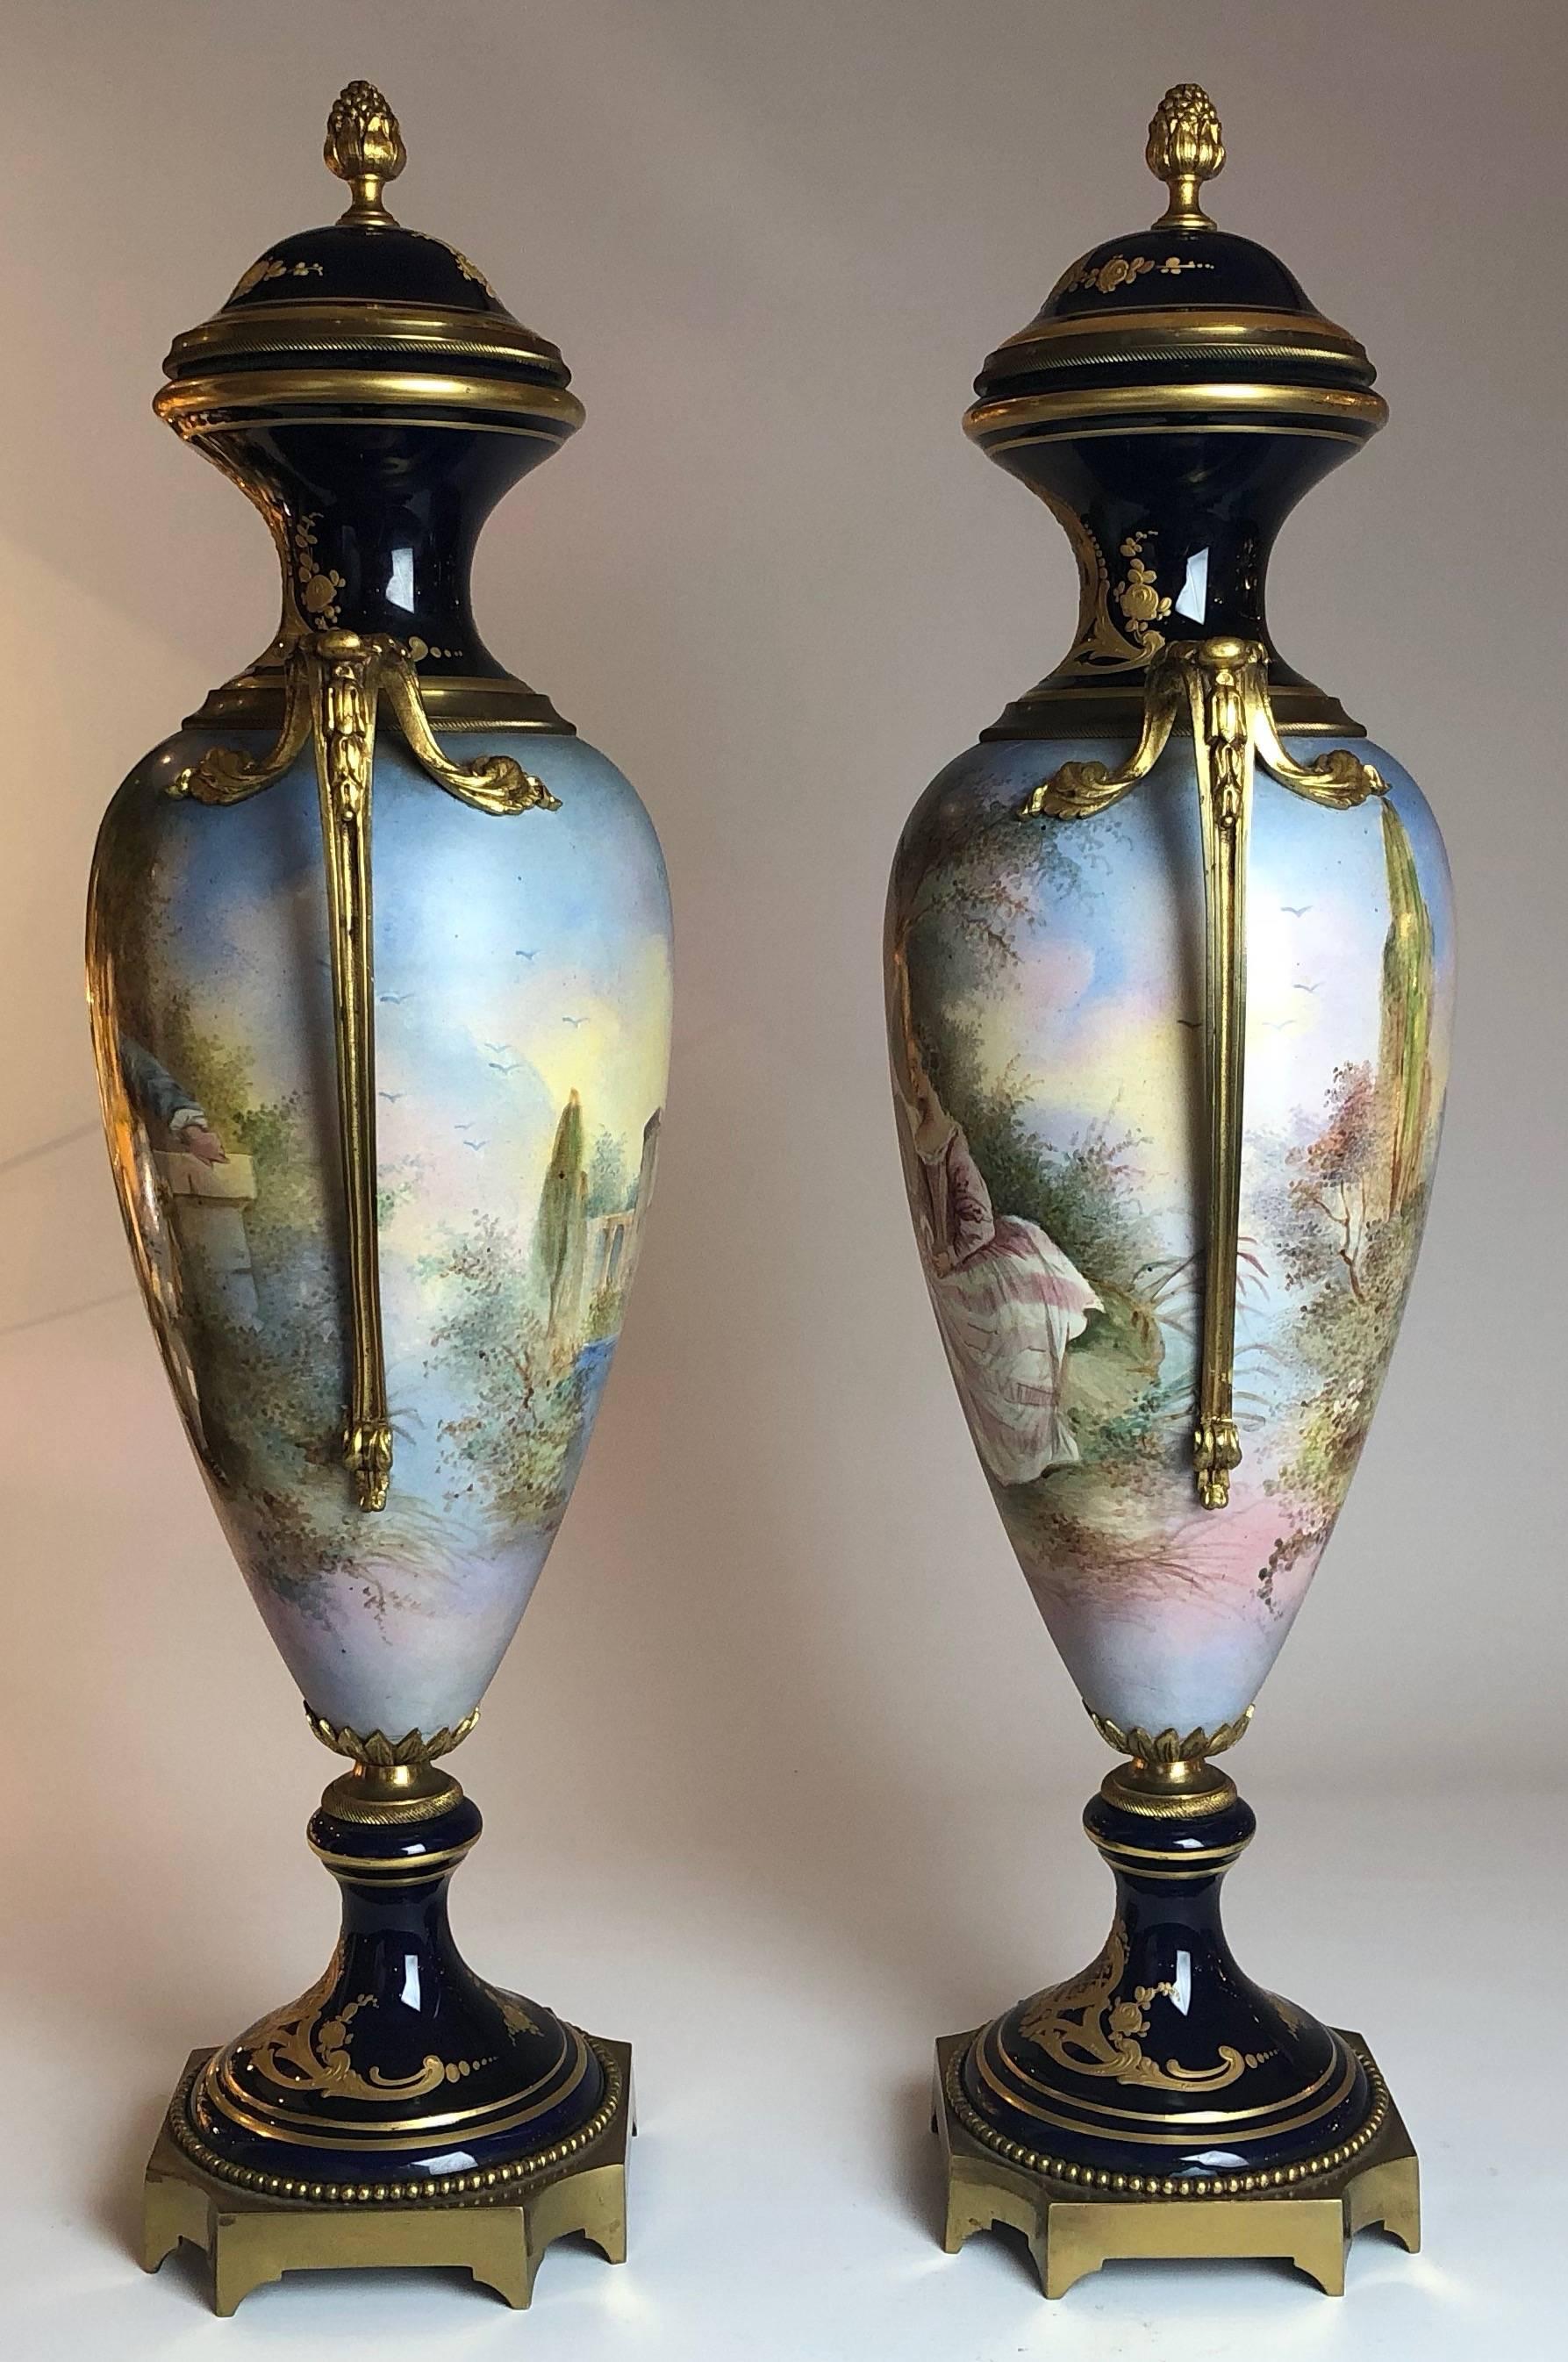 A fantastic pair of Gormolu mounted Sèvres vase, of the highest quality. 

French, circa 1870.

Measure: They stand 22